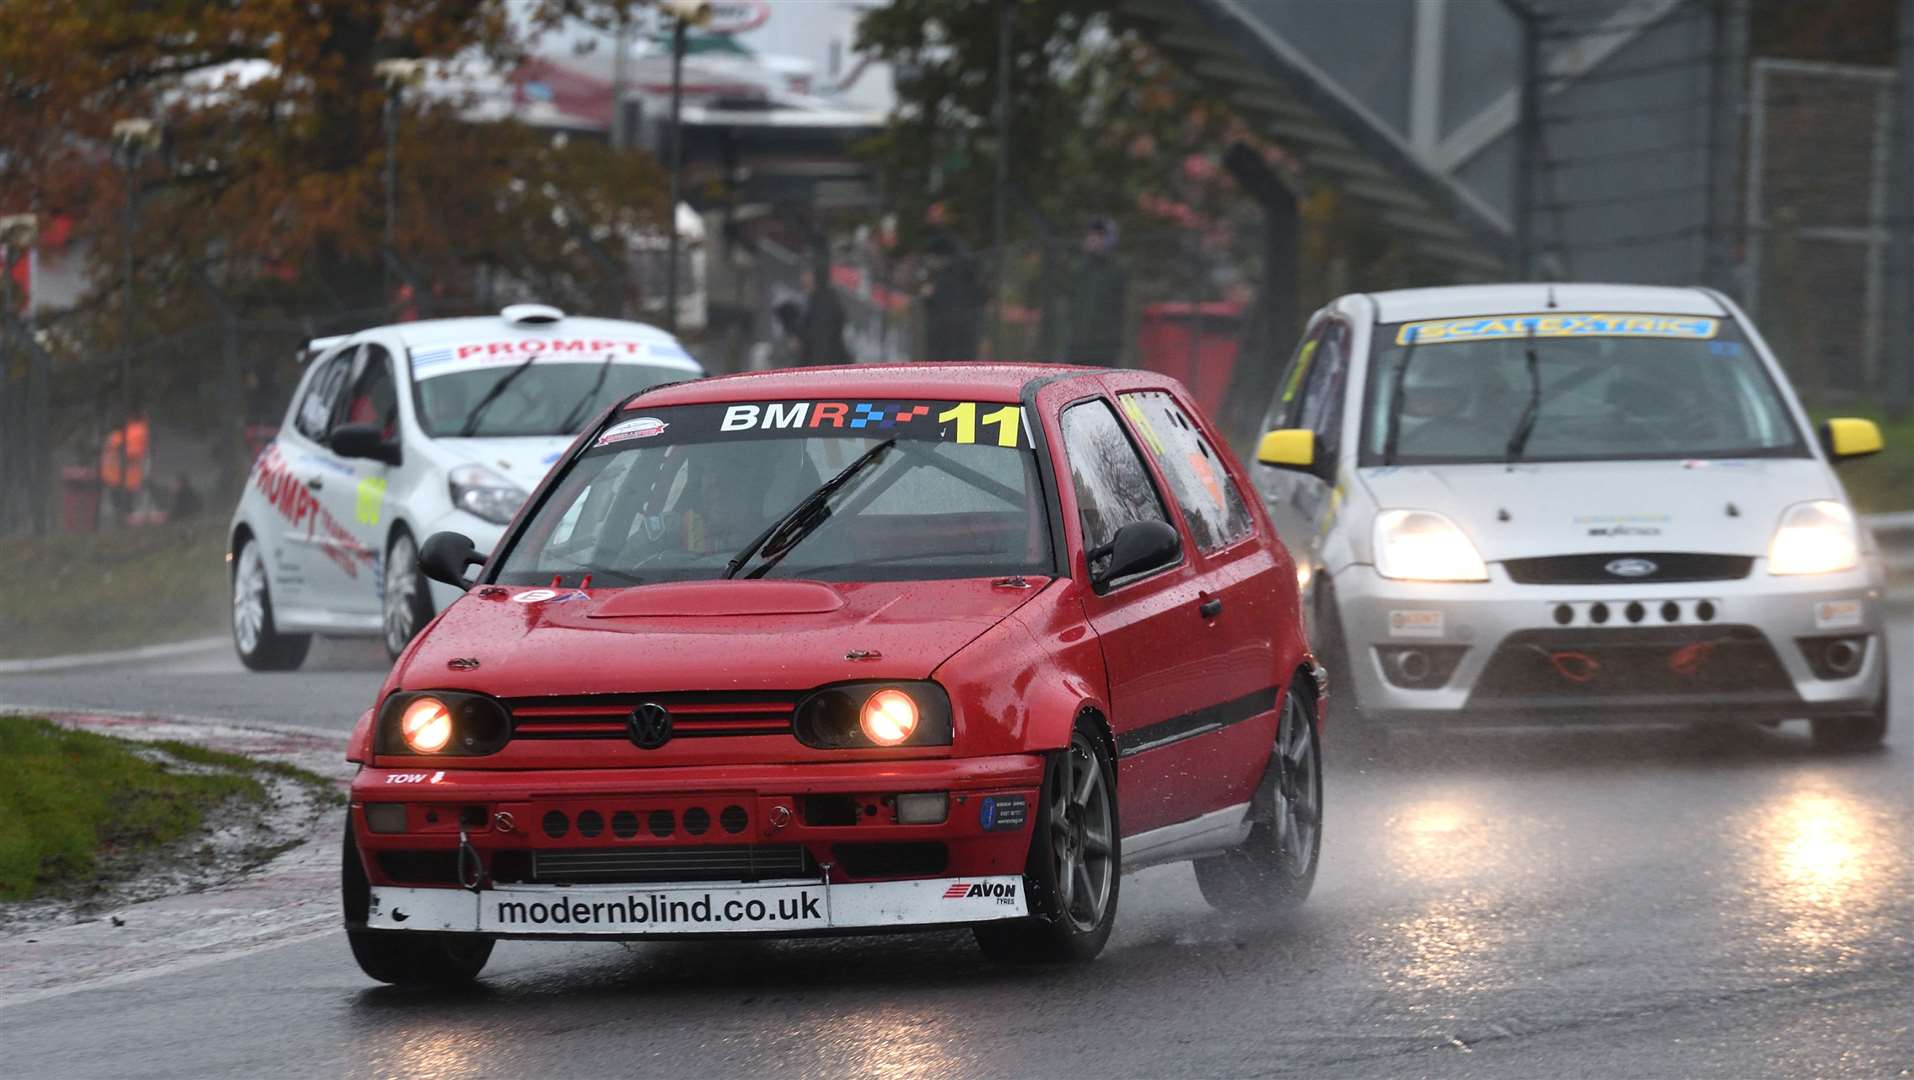 VW Golf driver Mark Cripps, from Lympne, claimed a first and second in class in the Super Saloons races